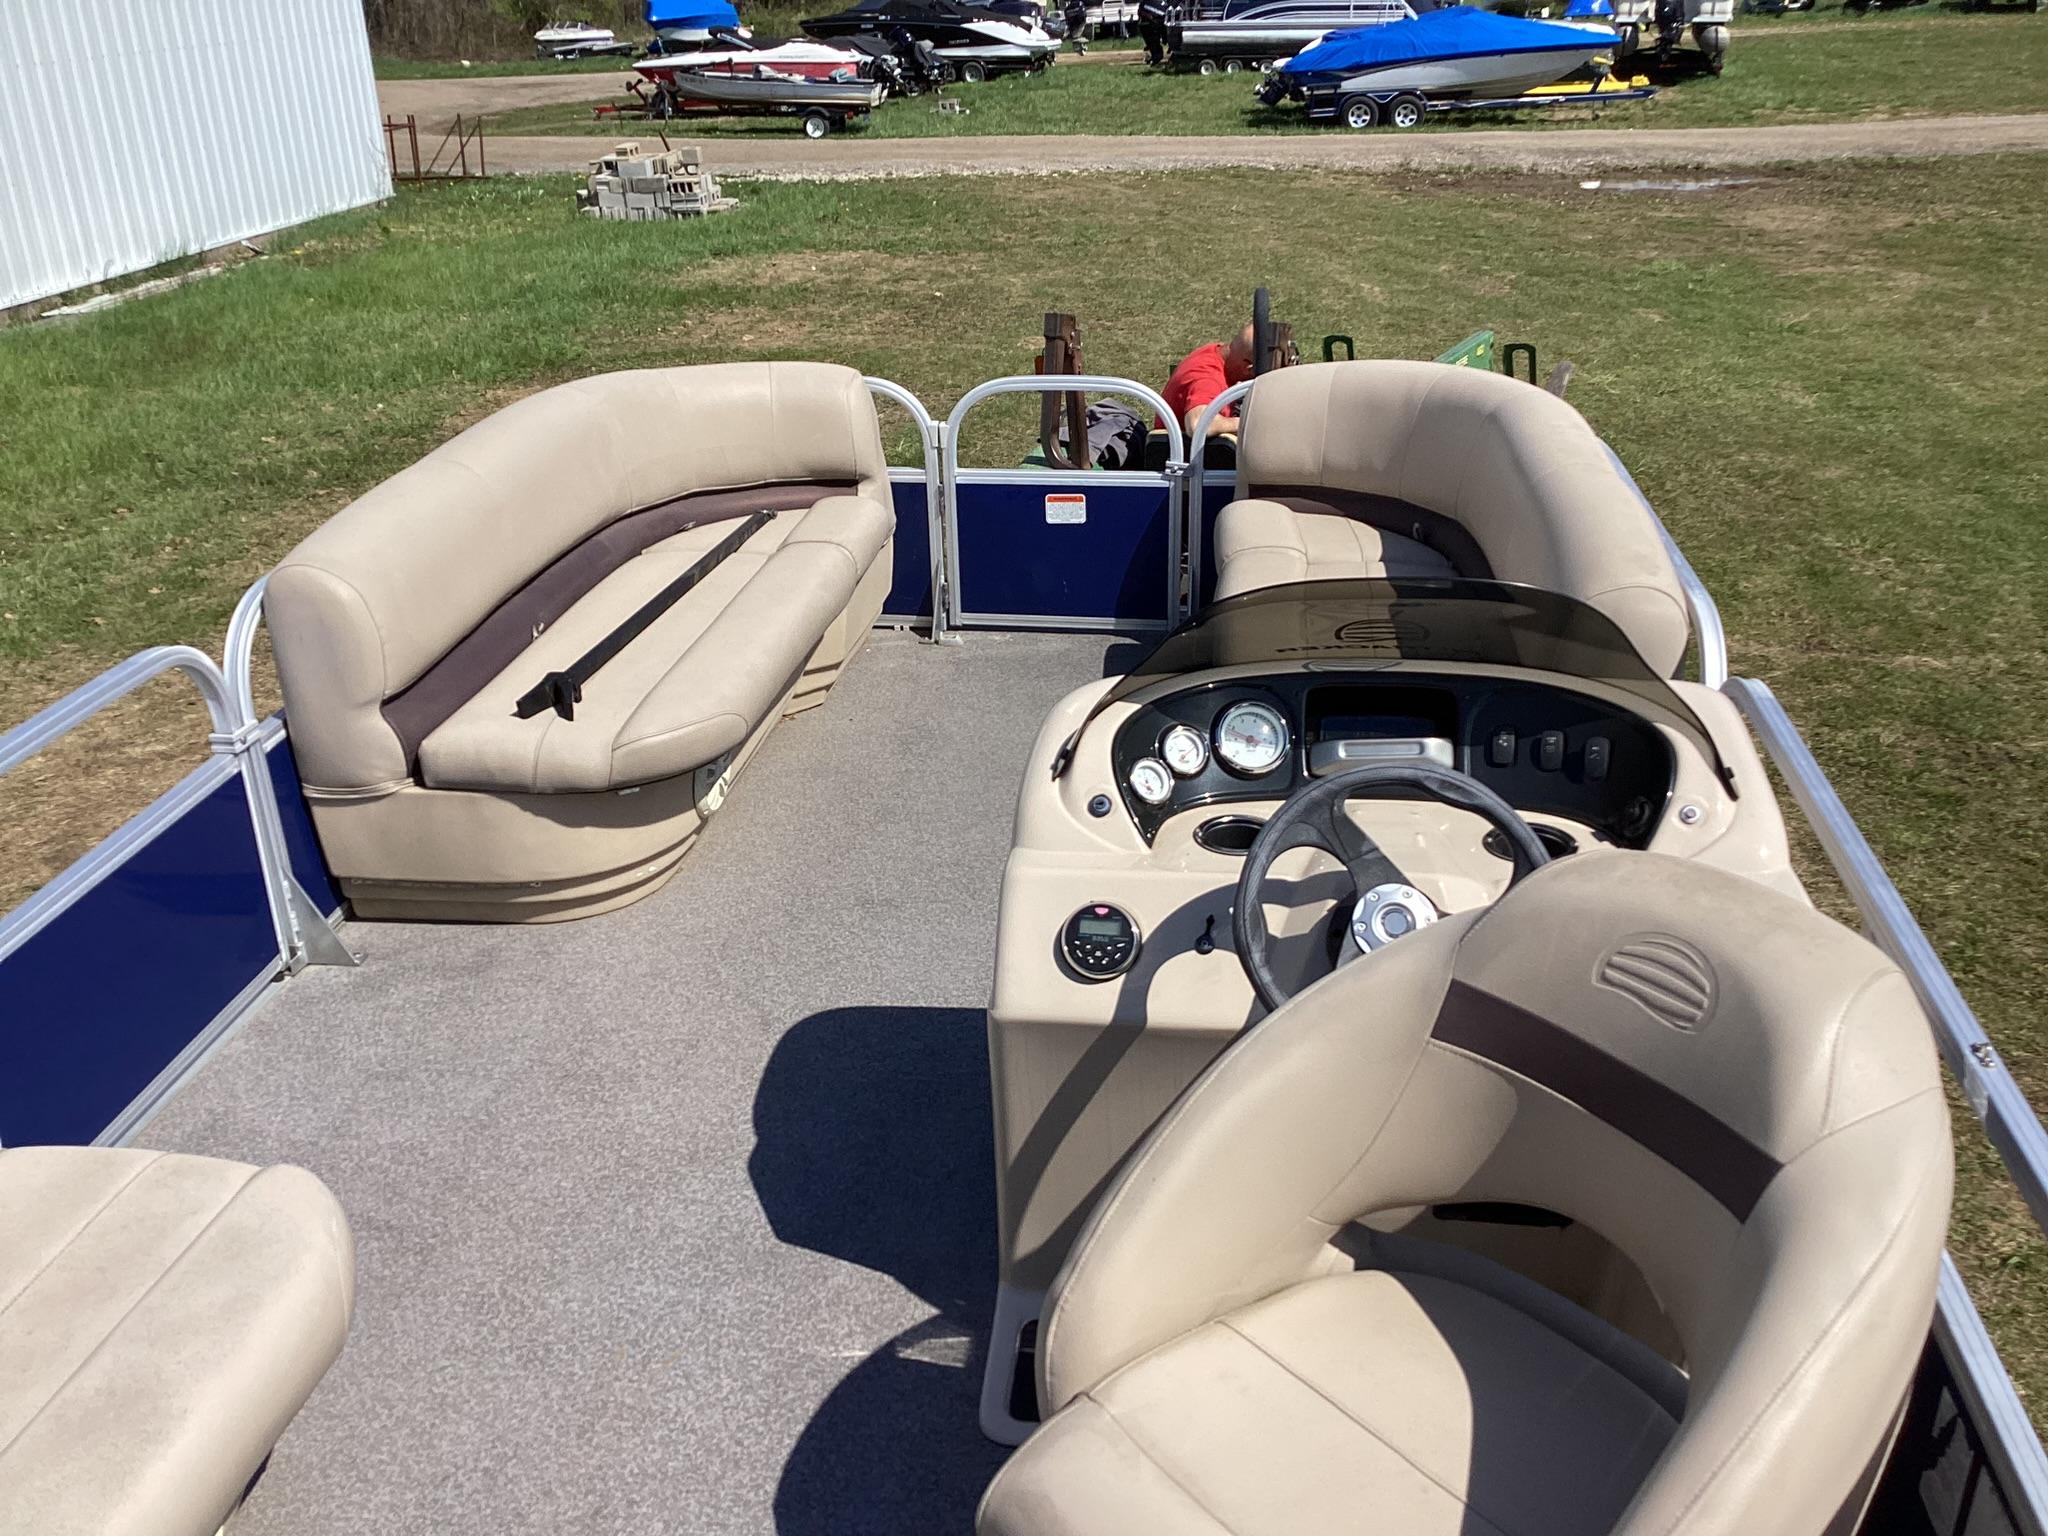 2018 Sun Tracker Party Barge 18 DLX